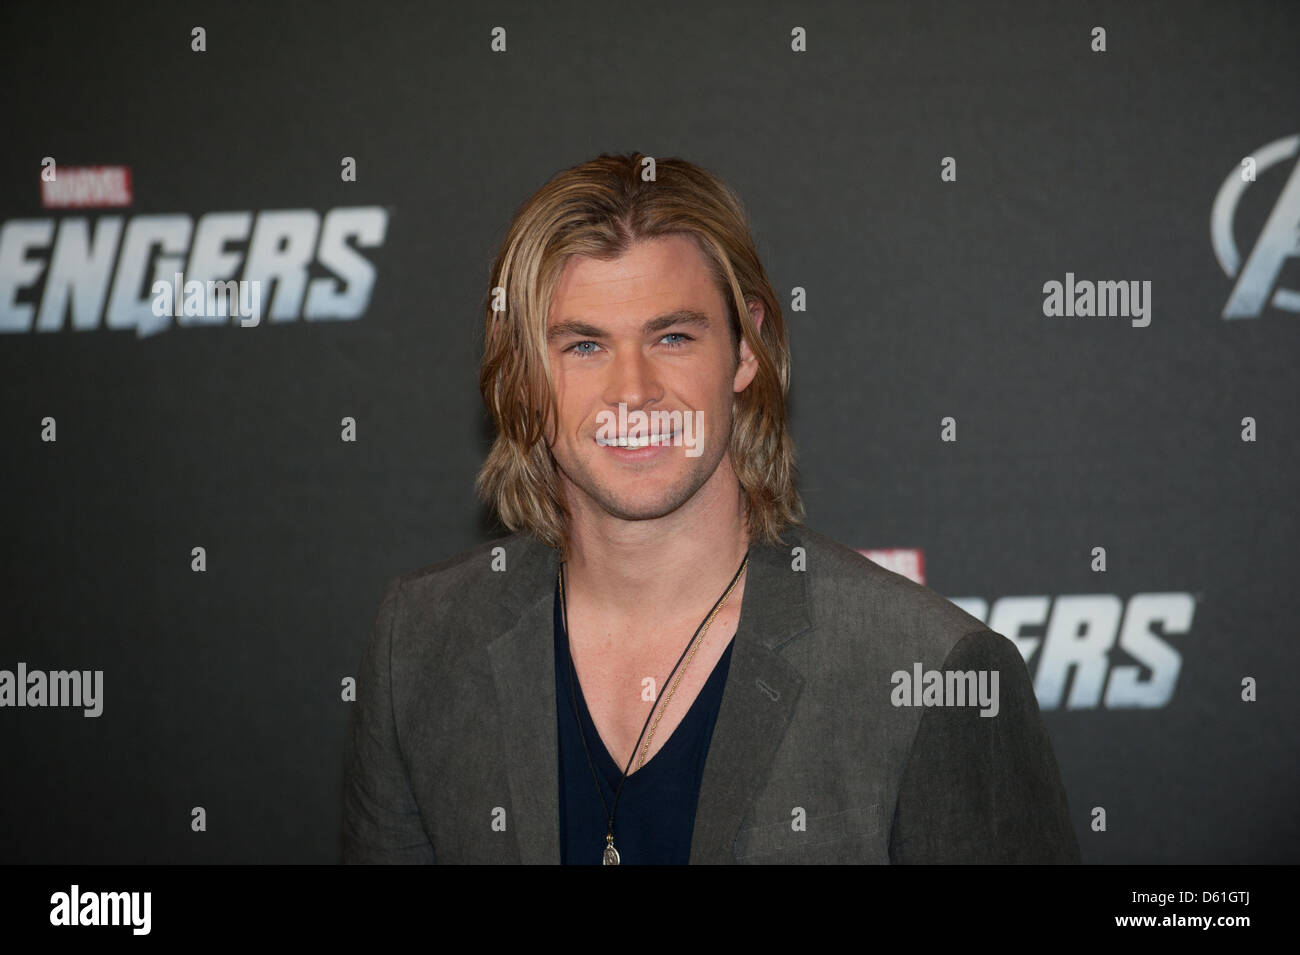 Australian actor Chris Hemsworth poses for the camera during the 'Marvel's the Avengers' photocall in Berlin, Germany, 23 April 2012. The movie will be aired to German cinemas on 26 April 2012. Photo: JOERG CARSTENSEN Stock Photo